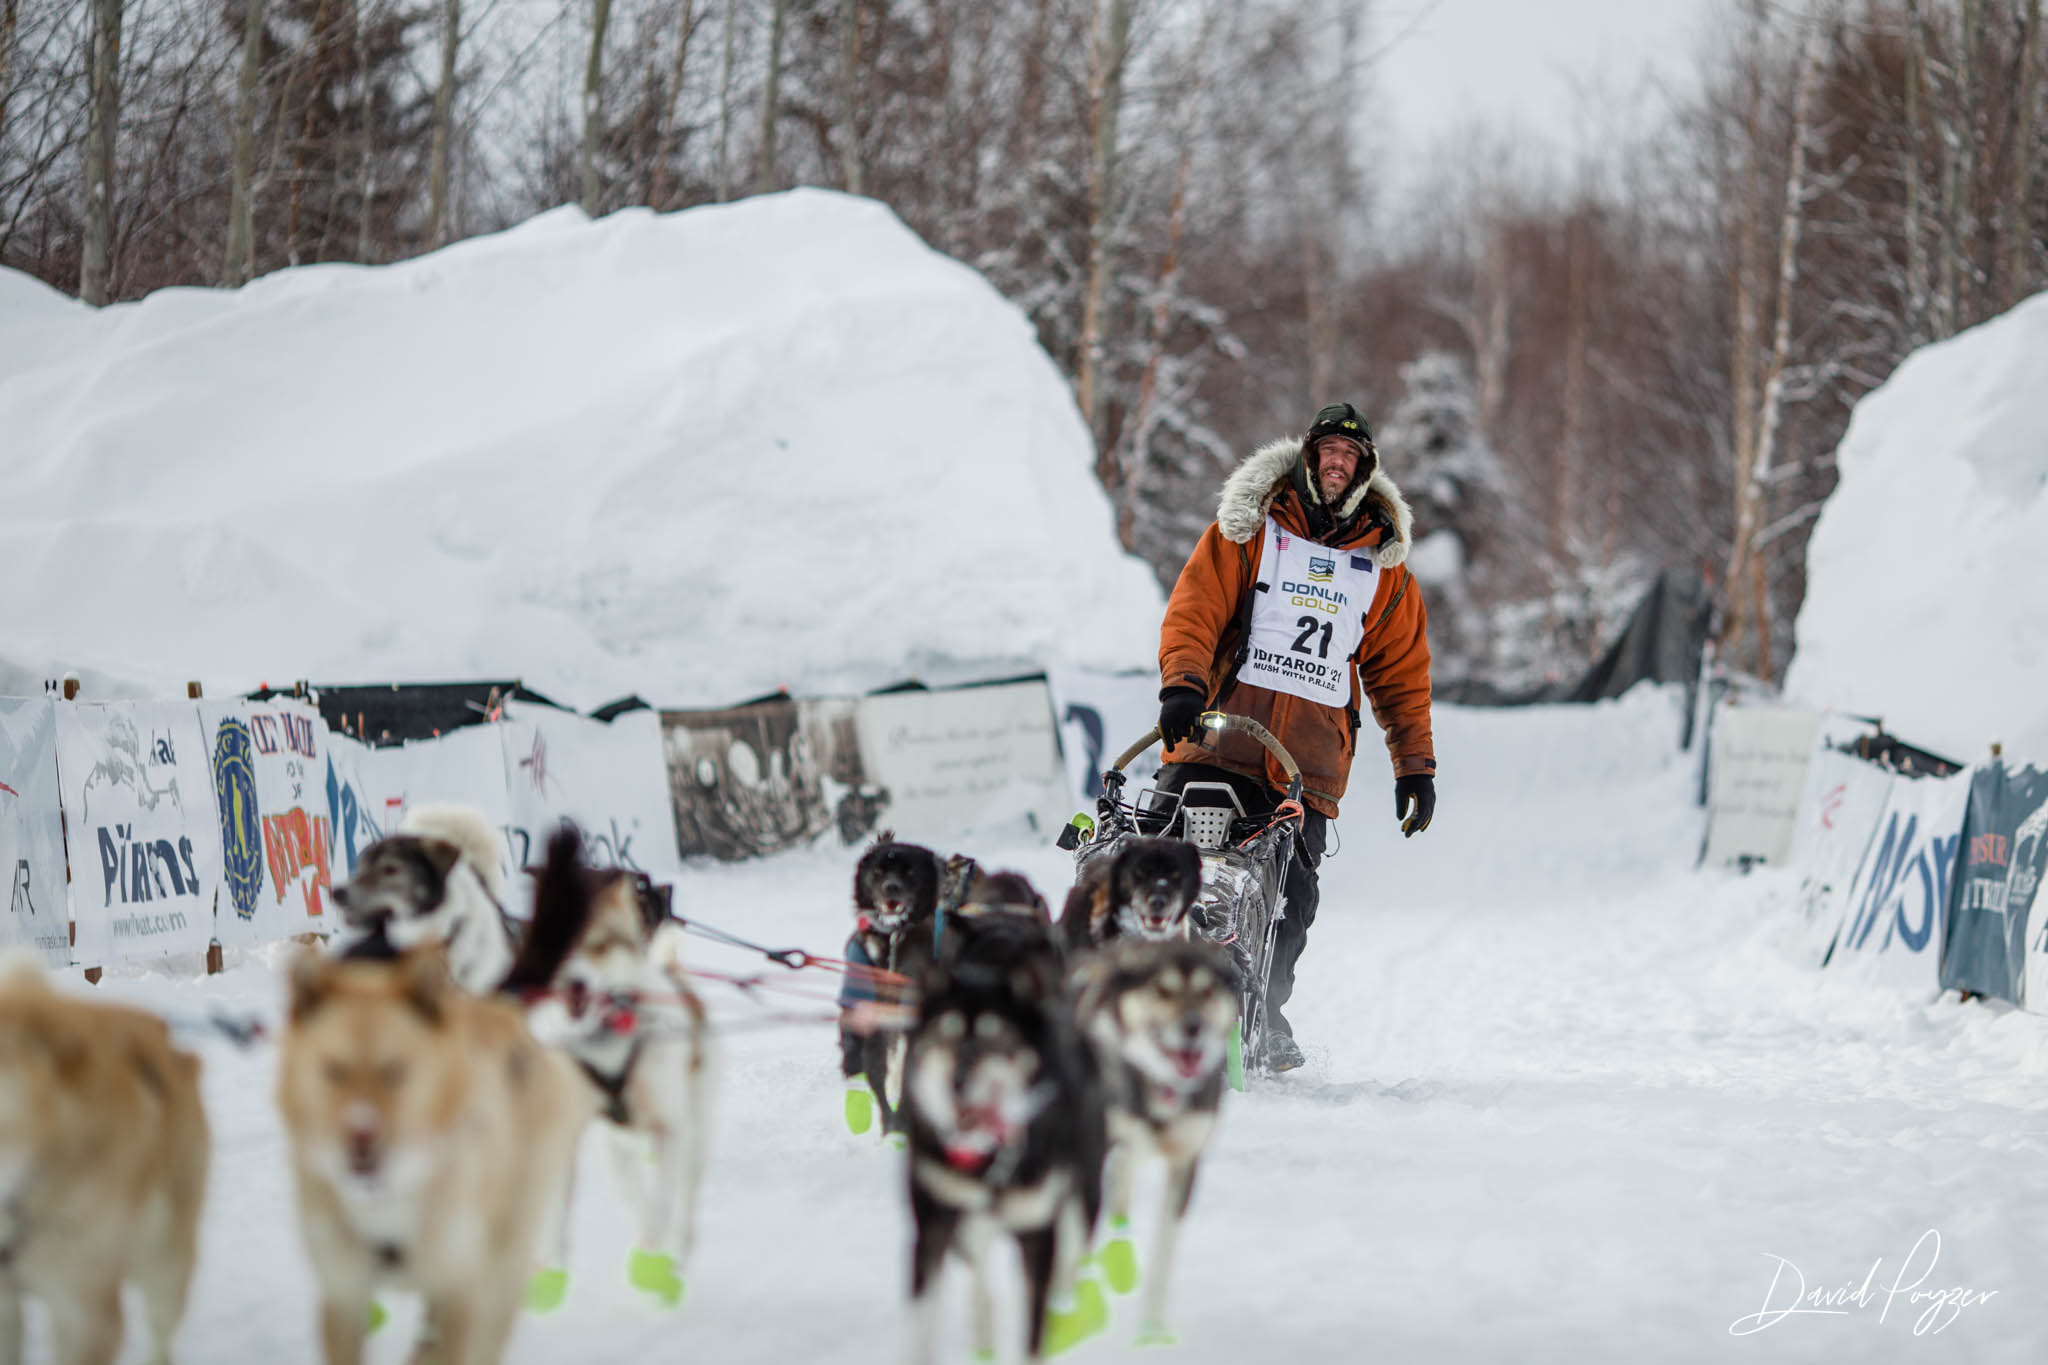 Brent Sass places 3rd in Iditarod 49